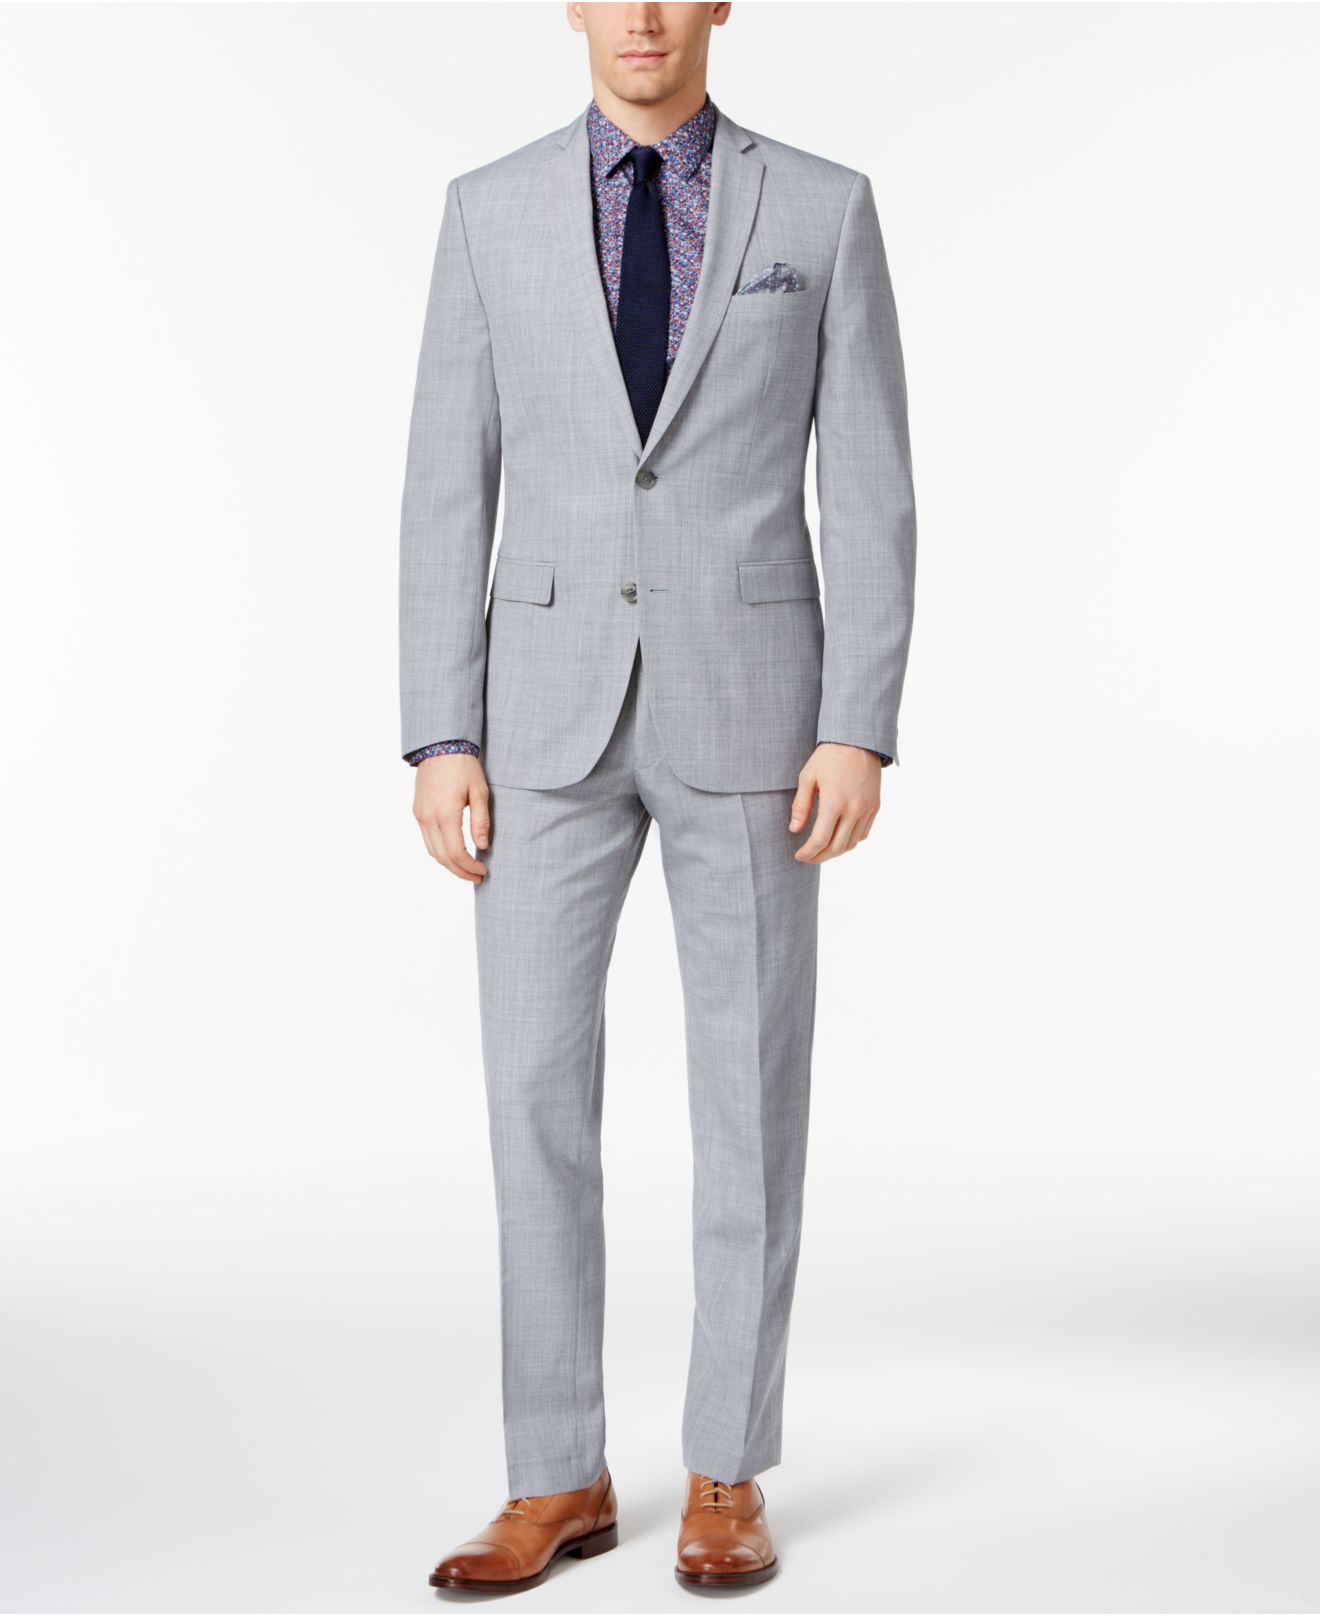 Men's Suits To Rent Near Me - Prom Suit Rental Near Me Dress Yy / This